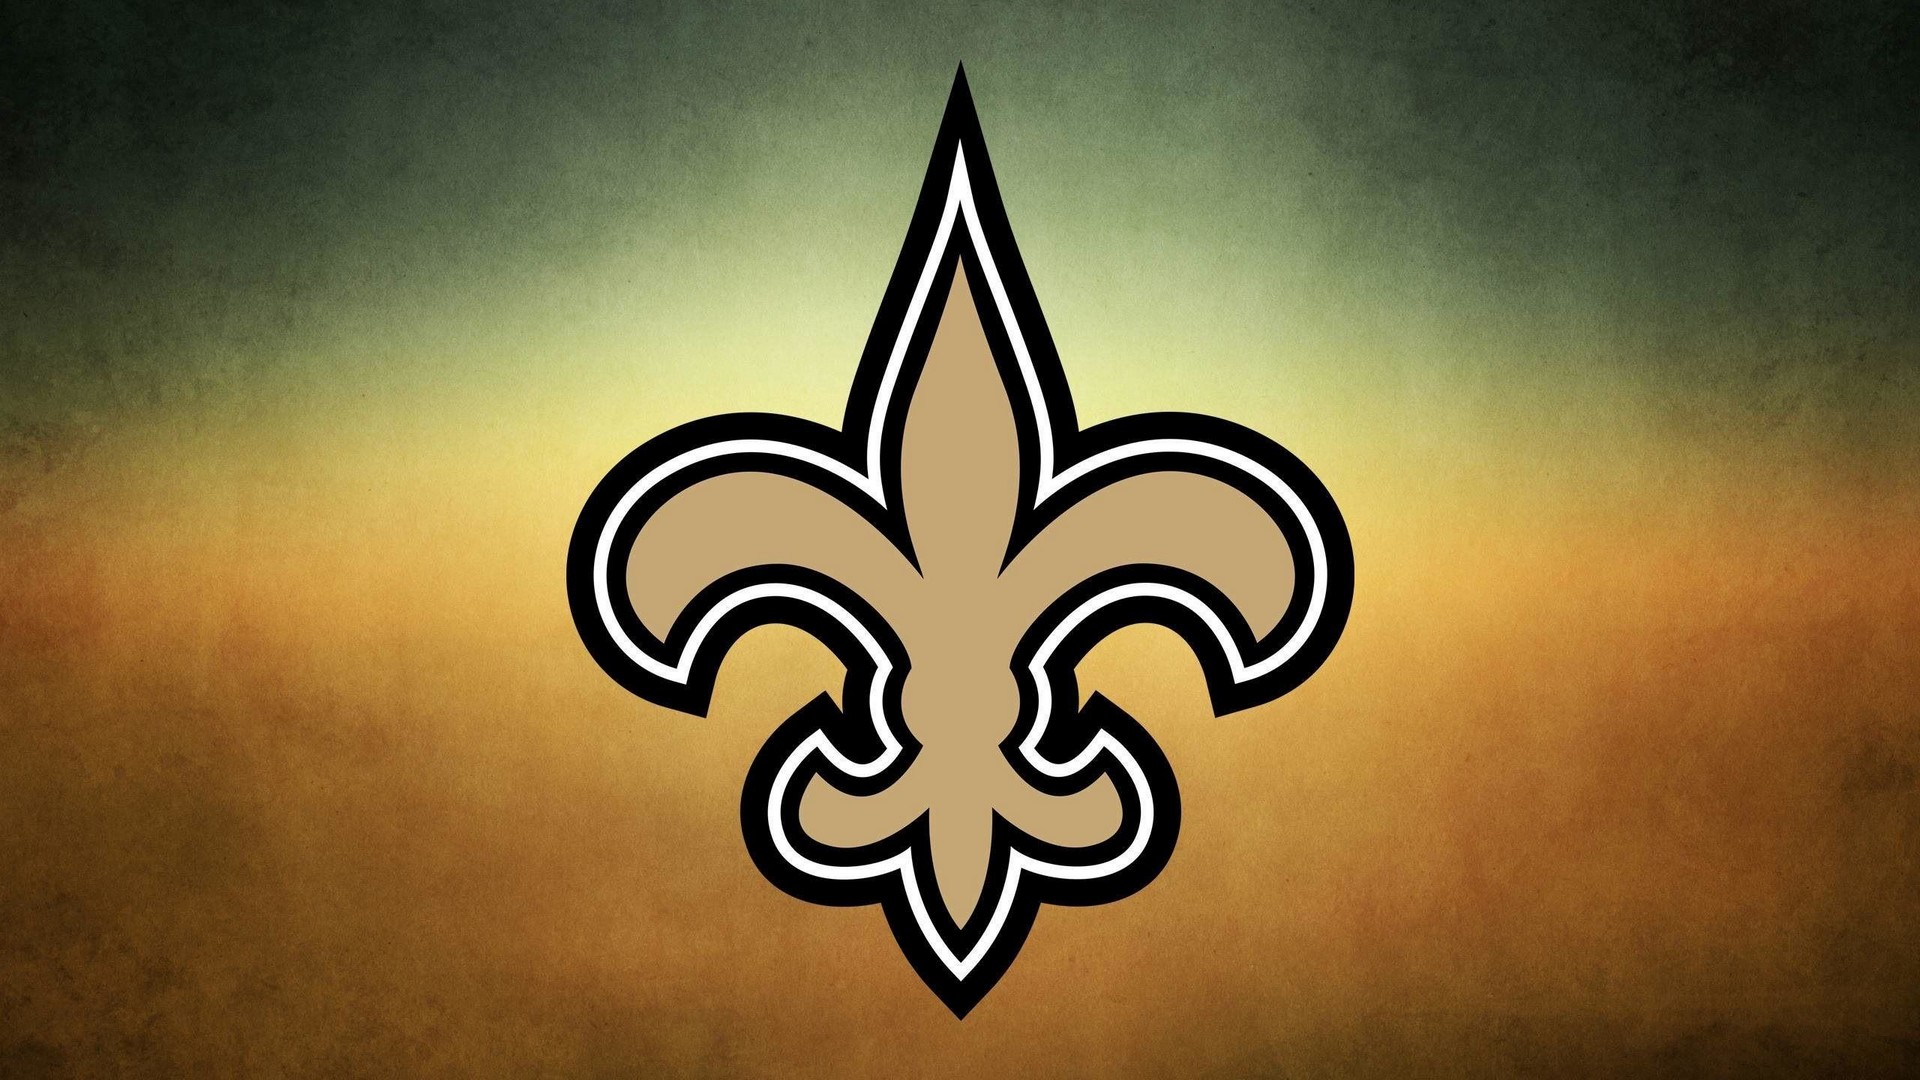 Backgrounds New Orleans Saints NFL HD With Resolution 1920X1080 pixel. You can make this wallpaper for your Mac or Windows Desktop Background, iPhone, Android or Tablet and another Smartphone device for free